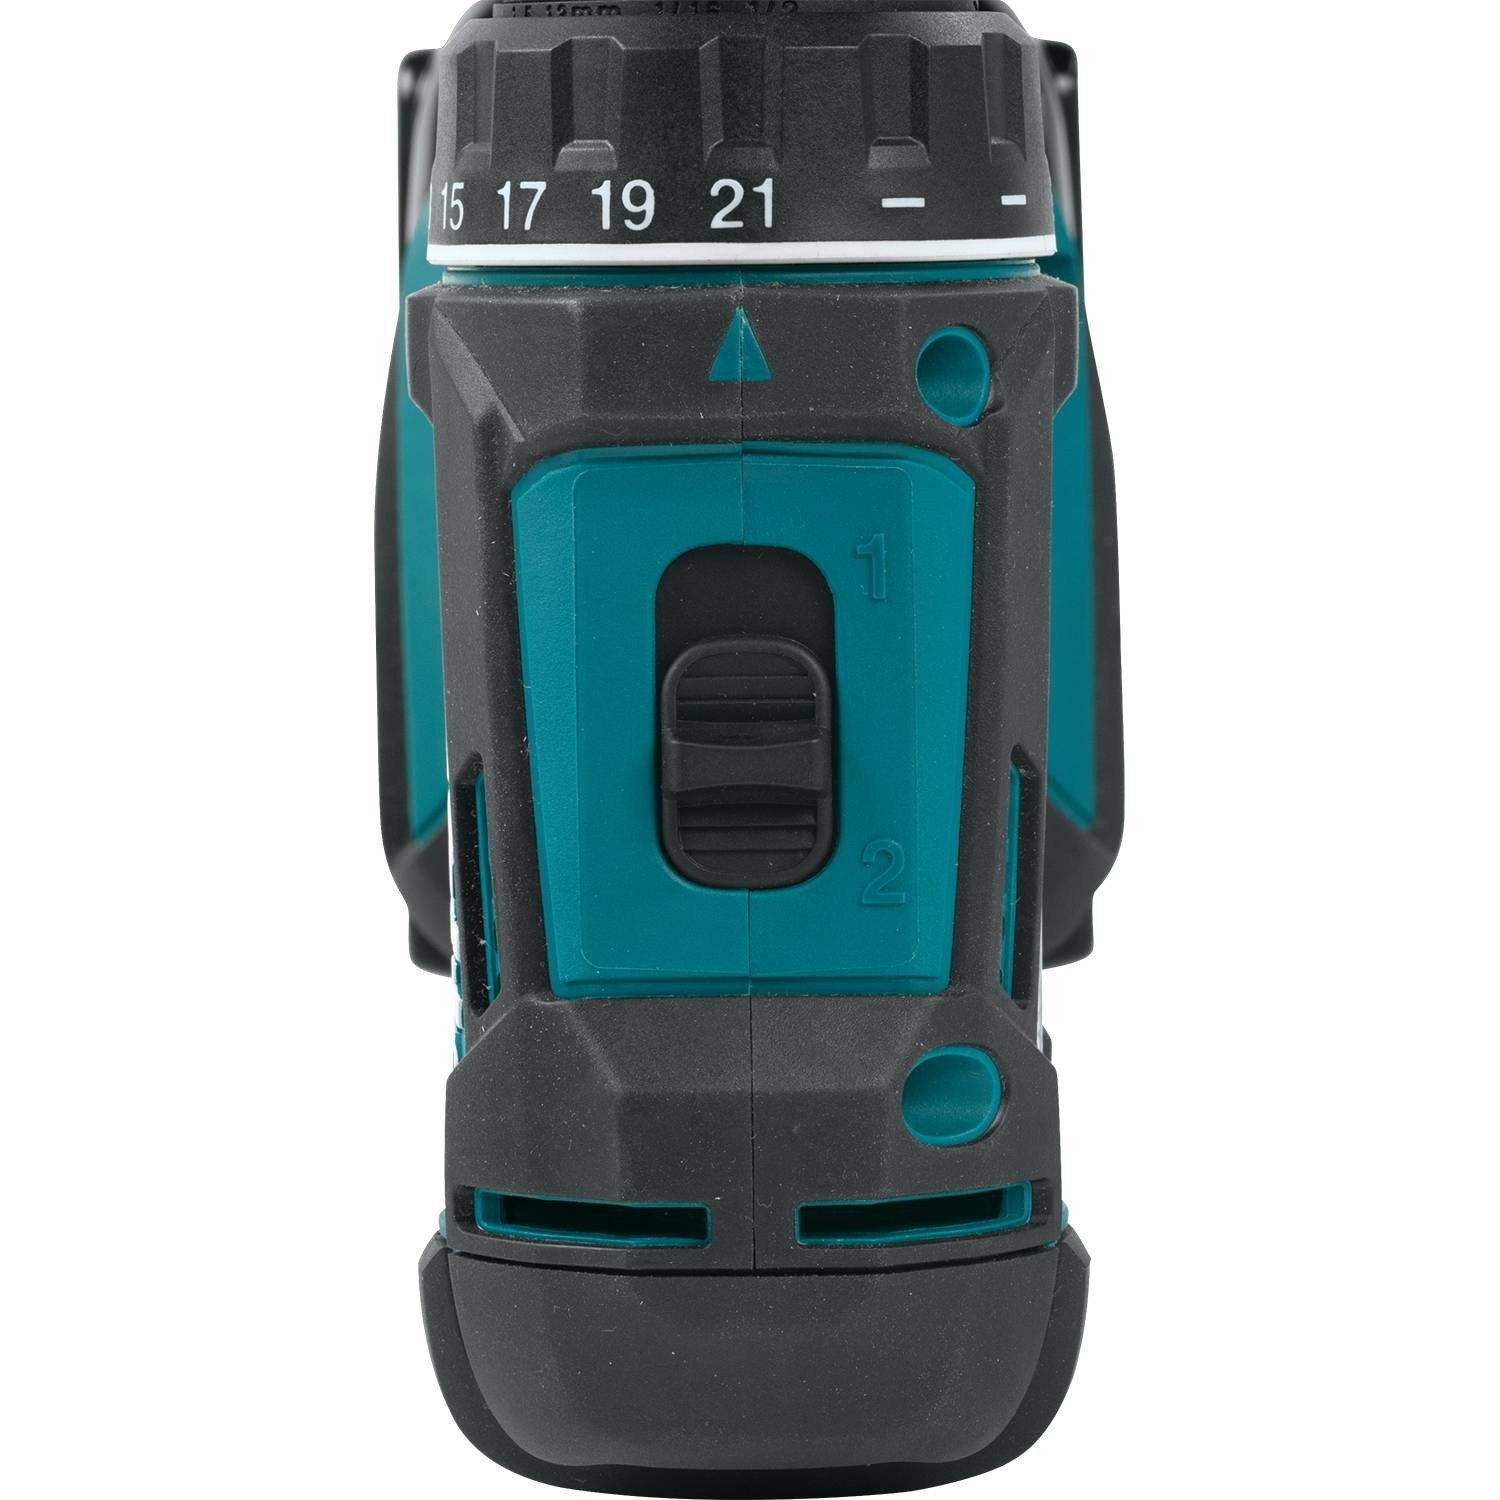 Makita XFD10Z 18V LXT Lithium-Ion Cordless Driver-Drill, Tool Only, 1/2